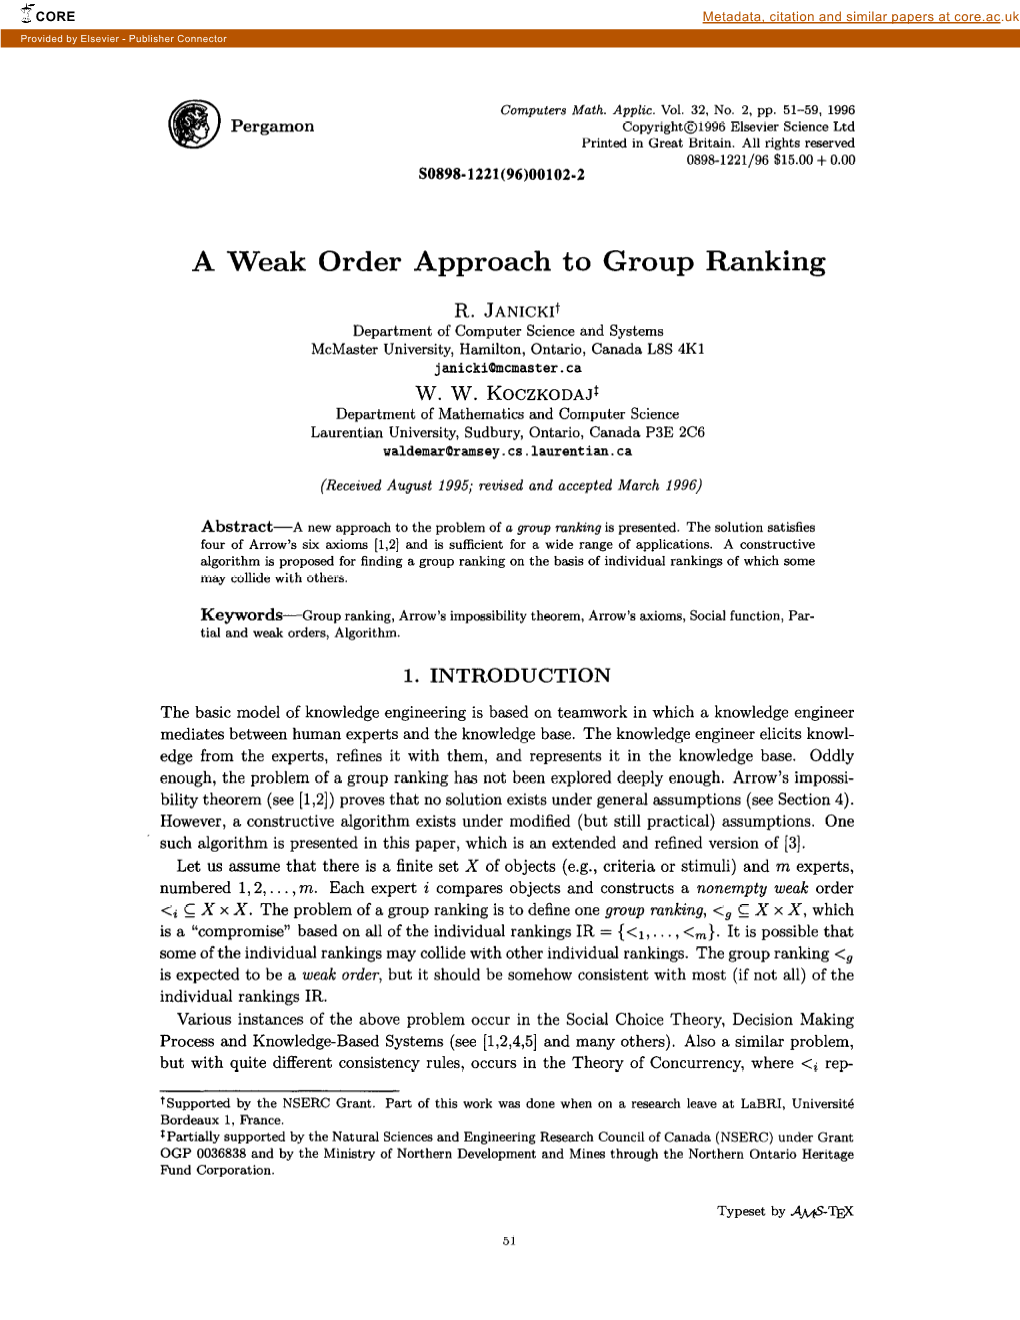 A Weak Order Approach to Group Ranking